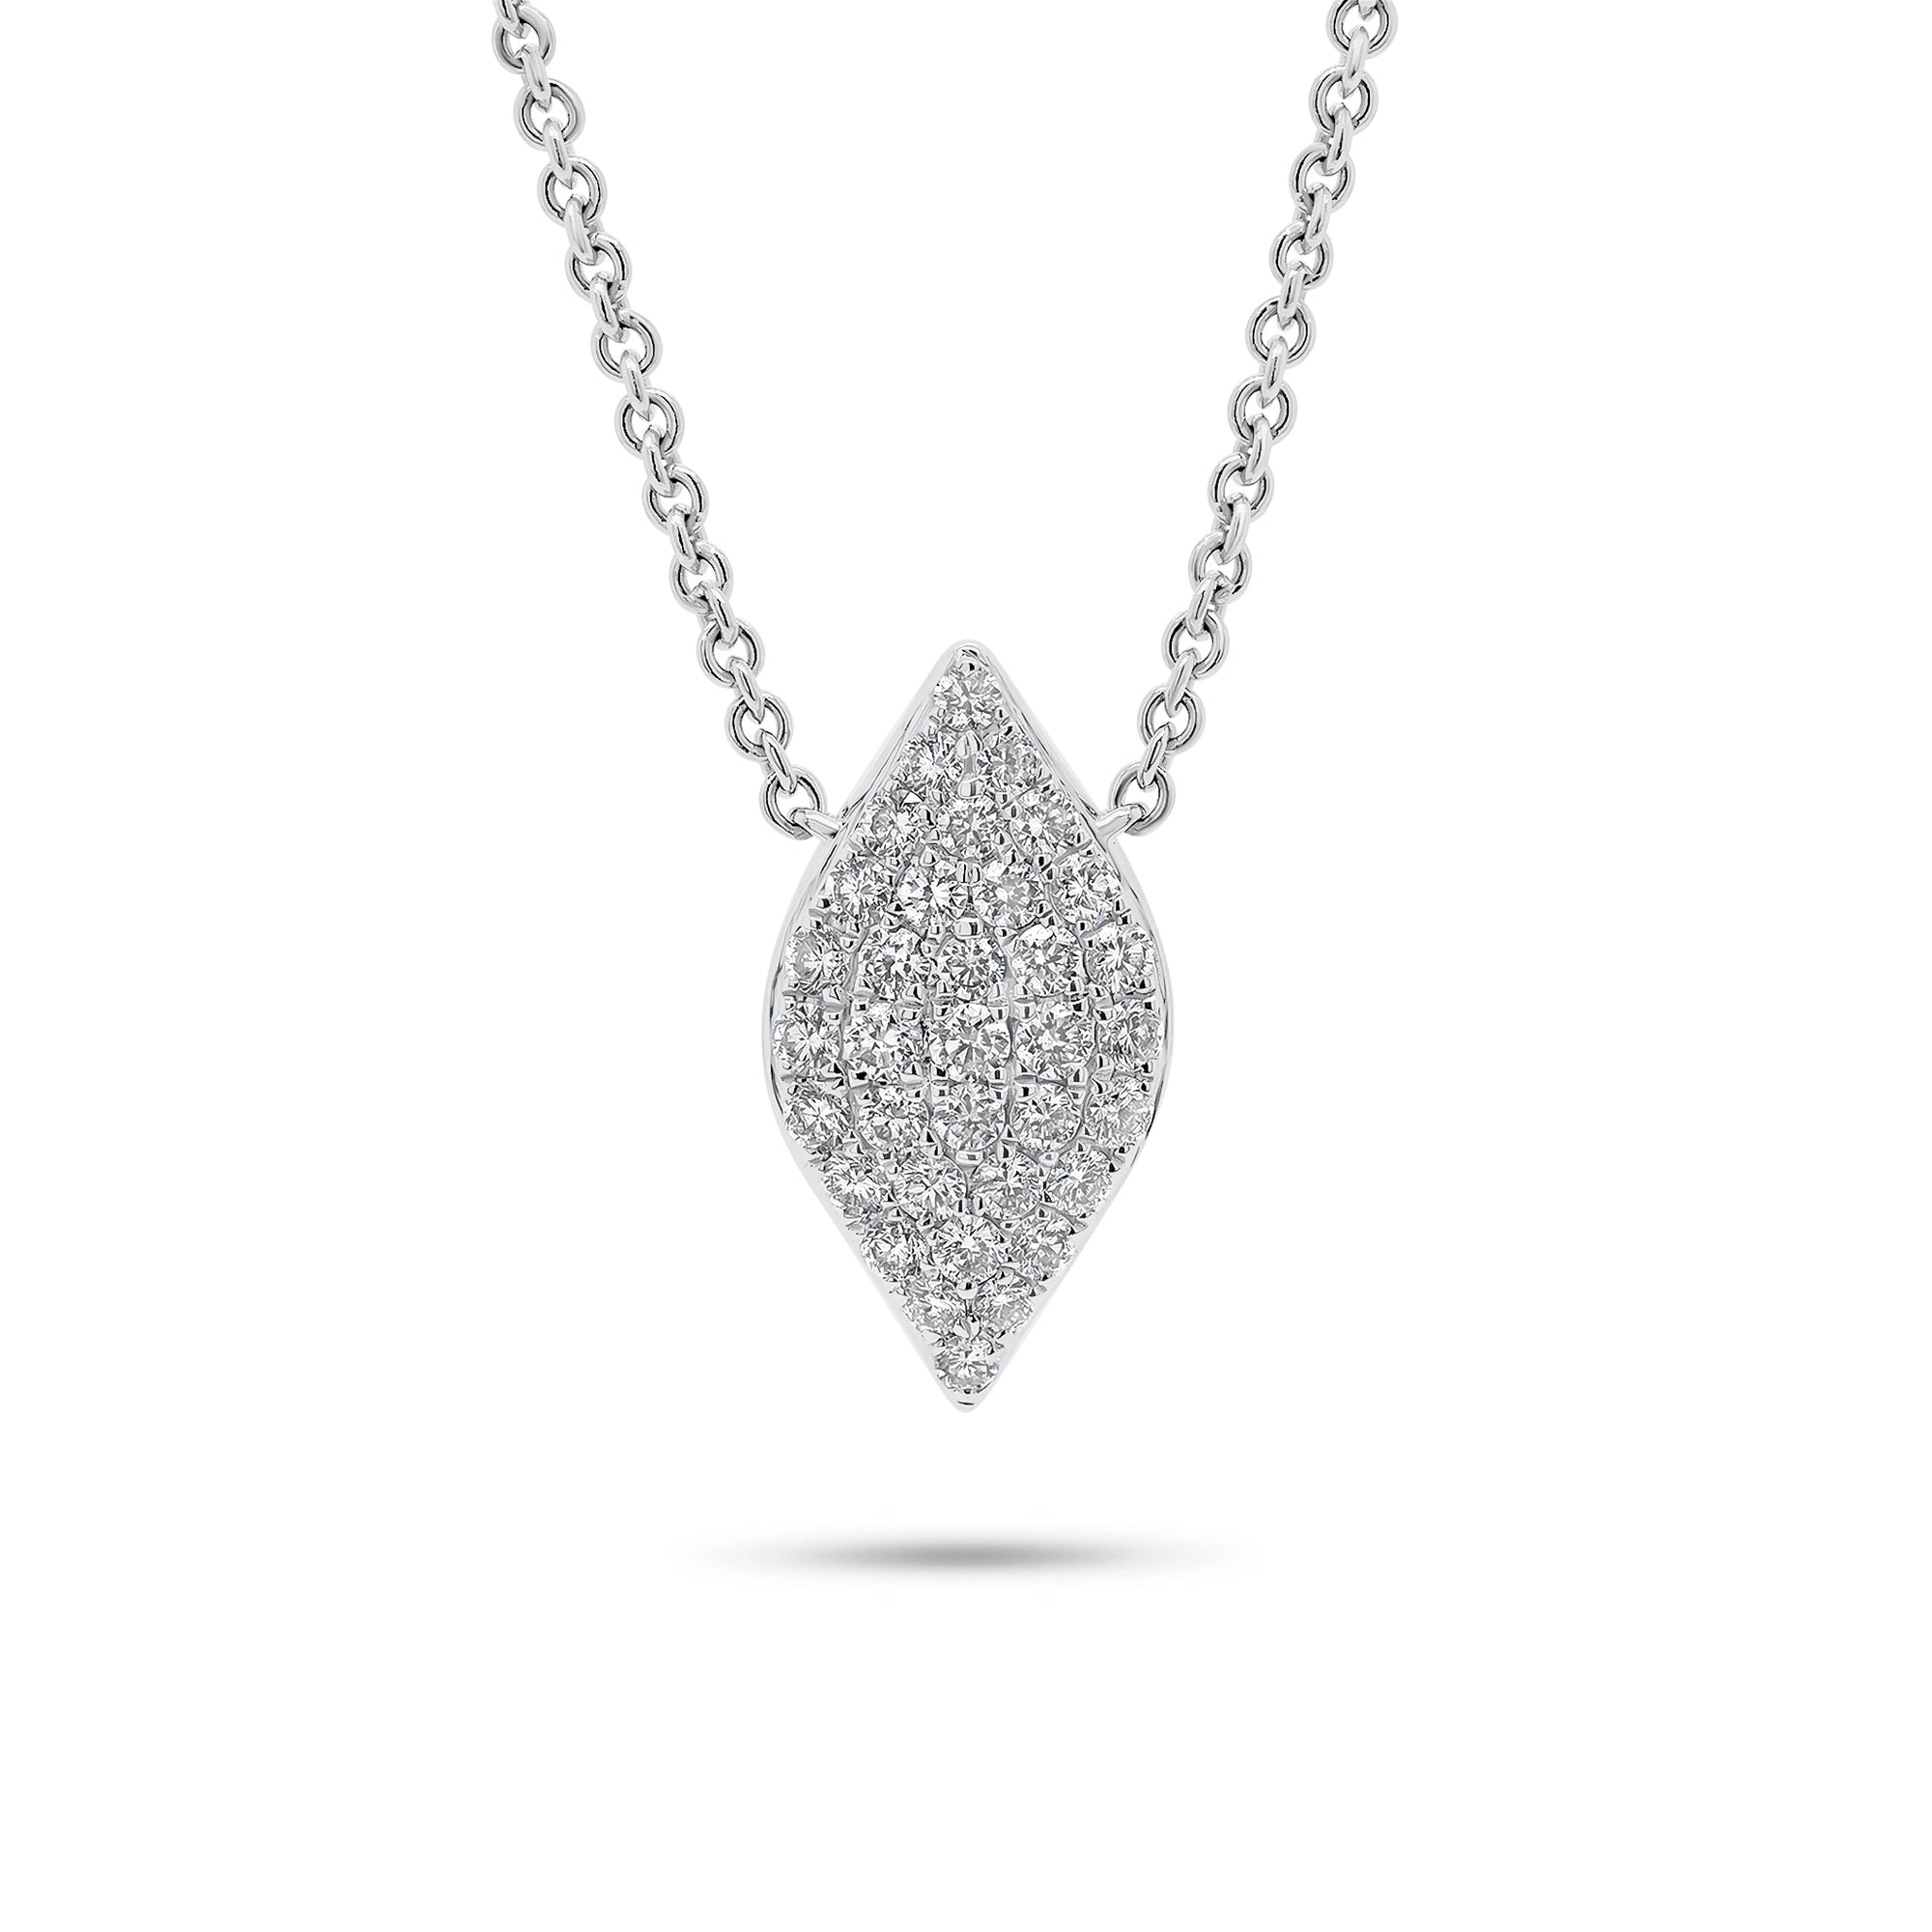 Solid 18k white gold weighing 3.99 grams with 35 round diamonds weighing 0.38 carats Pave Diamond Marquise Pendant Necklace | Nuha Jewelers